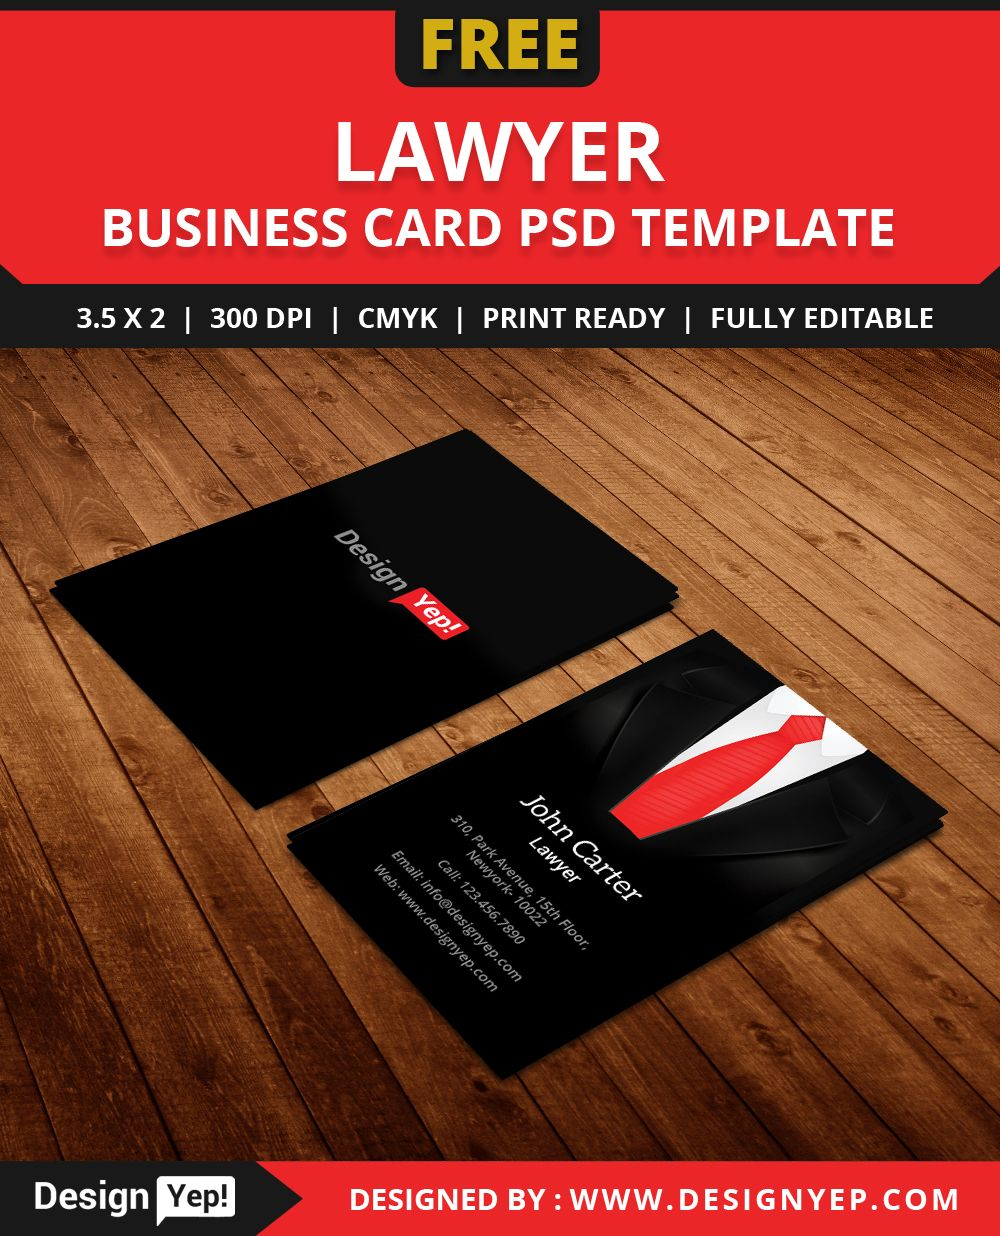 Free Lawyer Business Card Template Psd | Free Business Card Intended For Legal Business Cards Templates Free